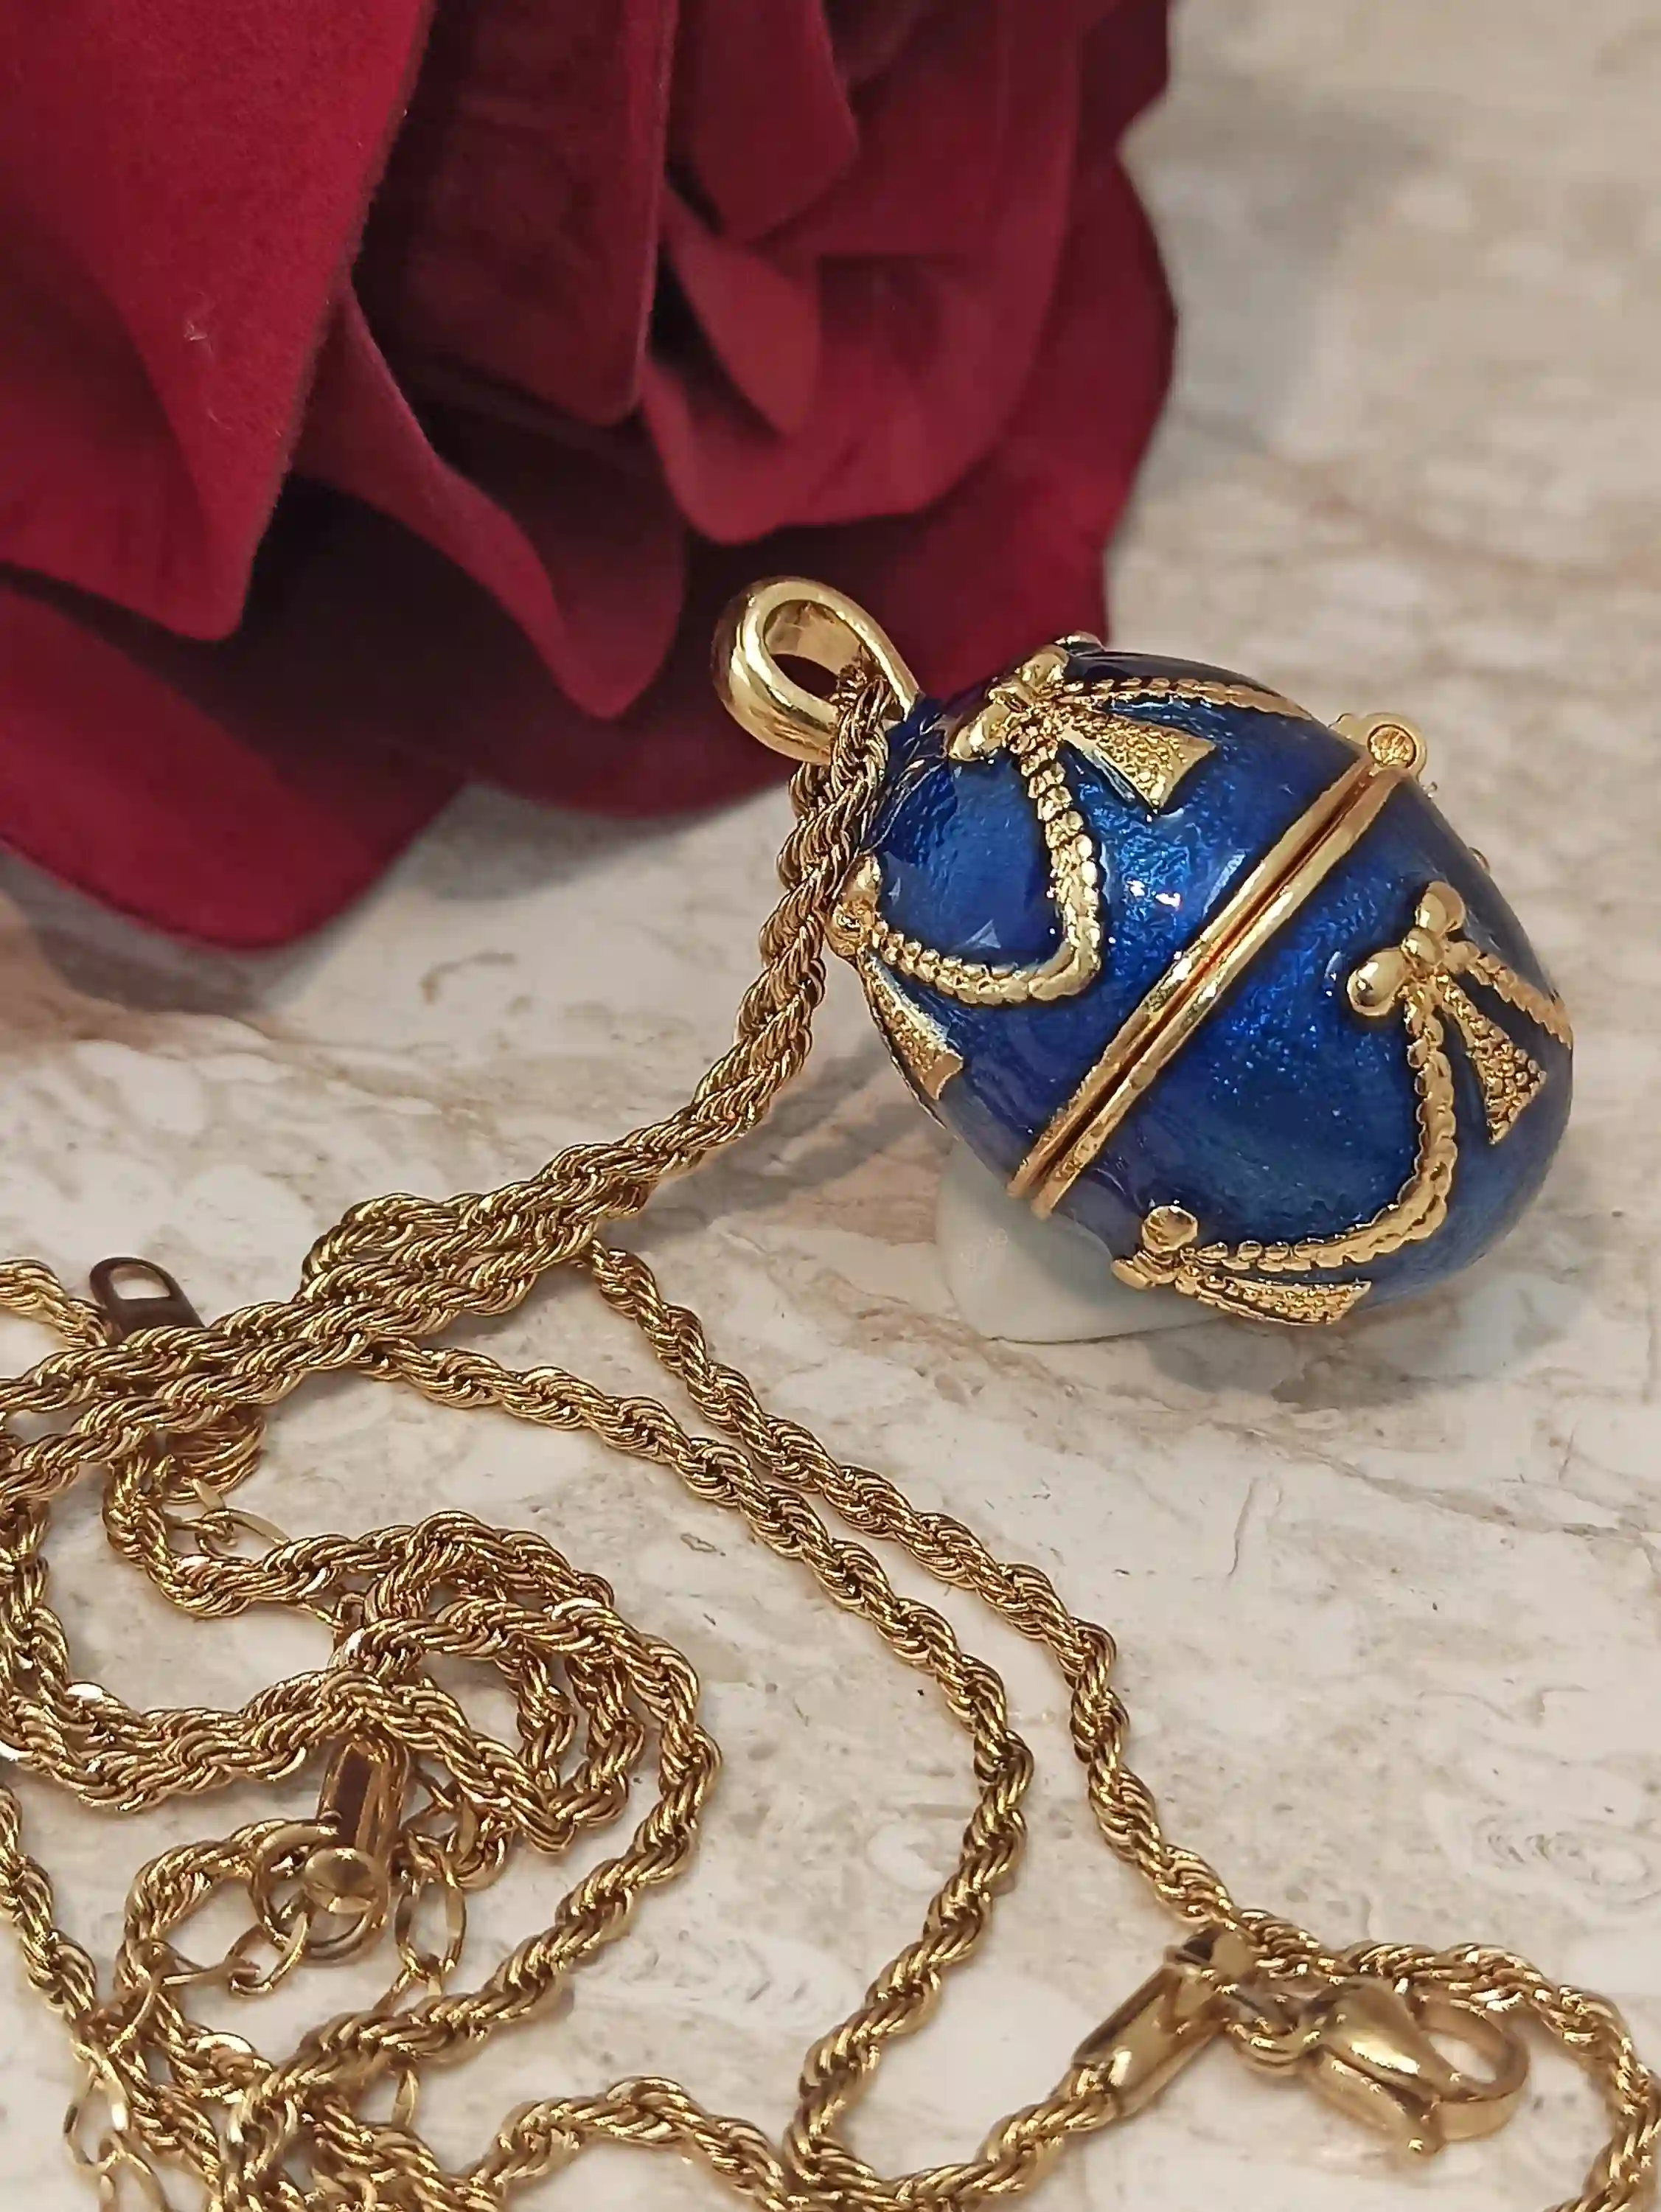 Faberge egg Carriage Sapphire Jewelry box gift for Mom Mother wife NATURAL Egg Swarovski Sapphire Diamonds 24k Gold Bracelet & Necklace 